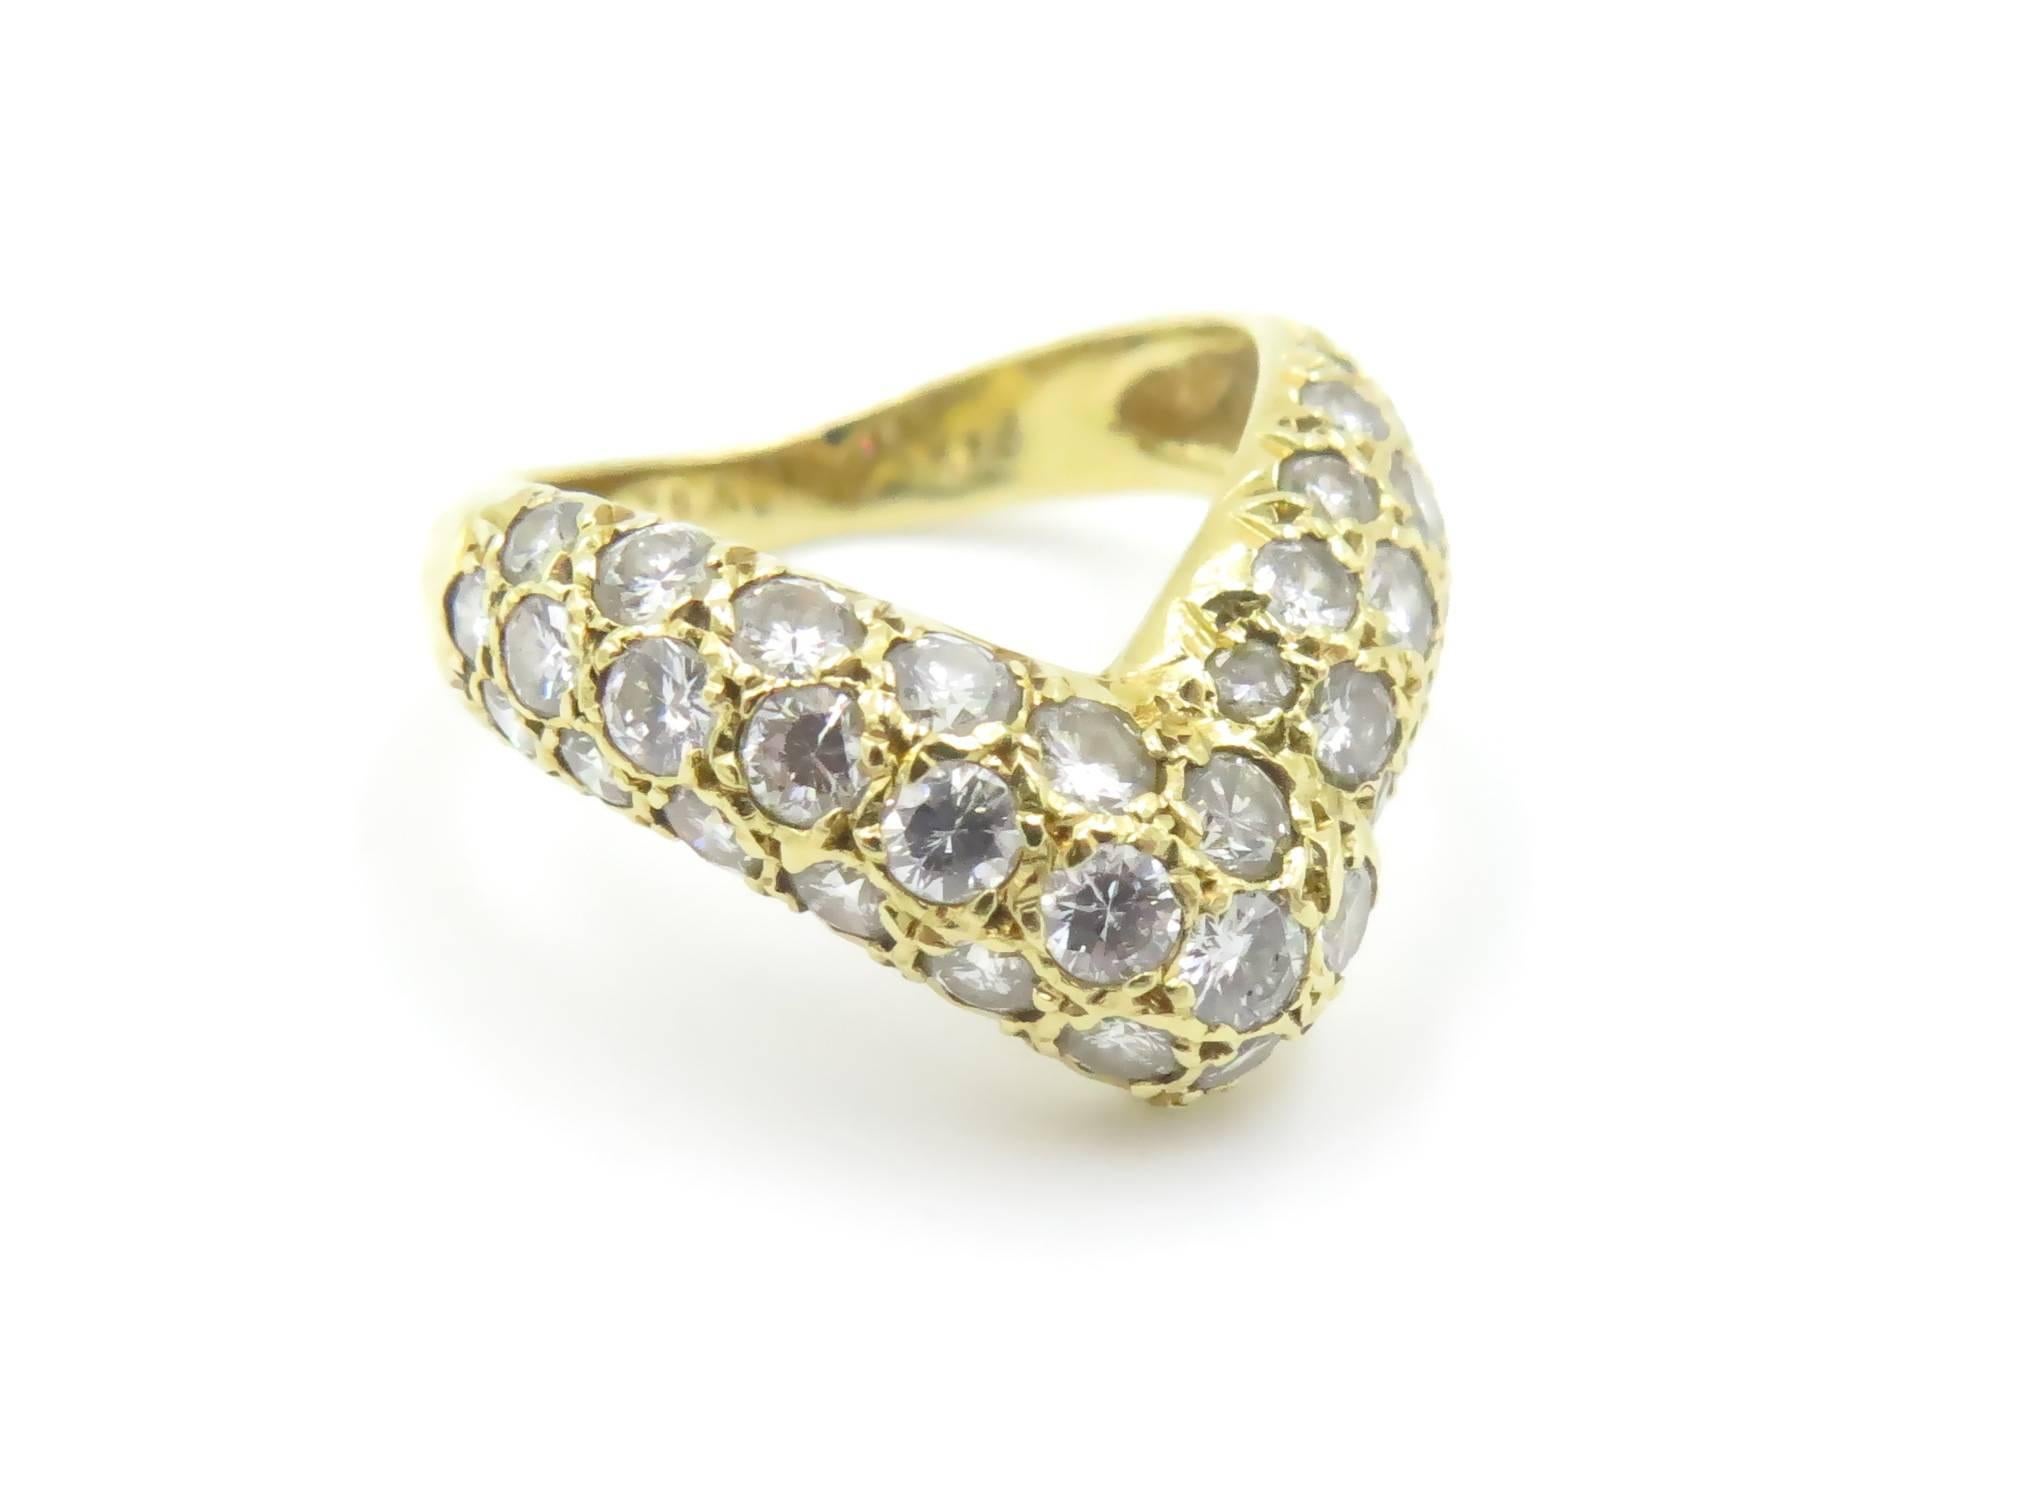 An 18 karat yellow gold and diamond ring.  Van Cleef & Arpels.  1979.  Designed as a pavé -set band of V design. Thirty Five (35) diamonds weigh approximately 1.40 carats.  Gross weight approximately 5.1 grams. Stamped VCA © 79 F (indistinct) 18K.